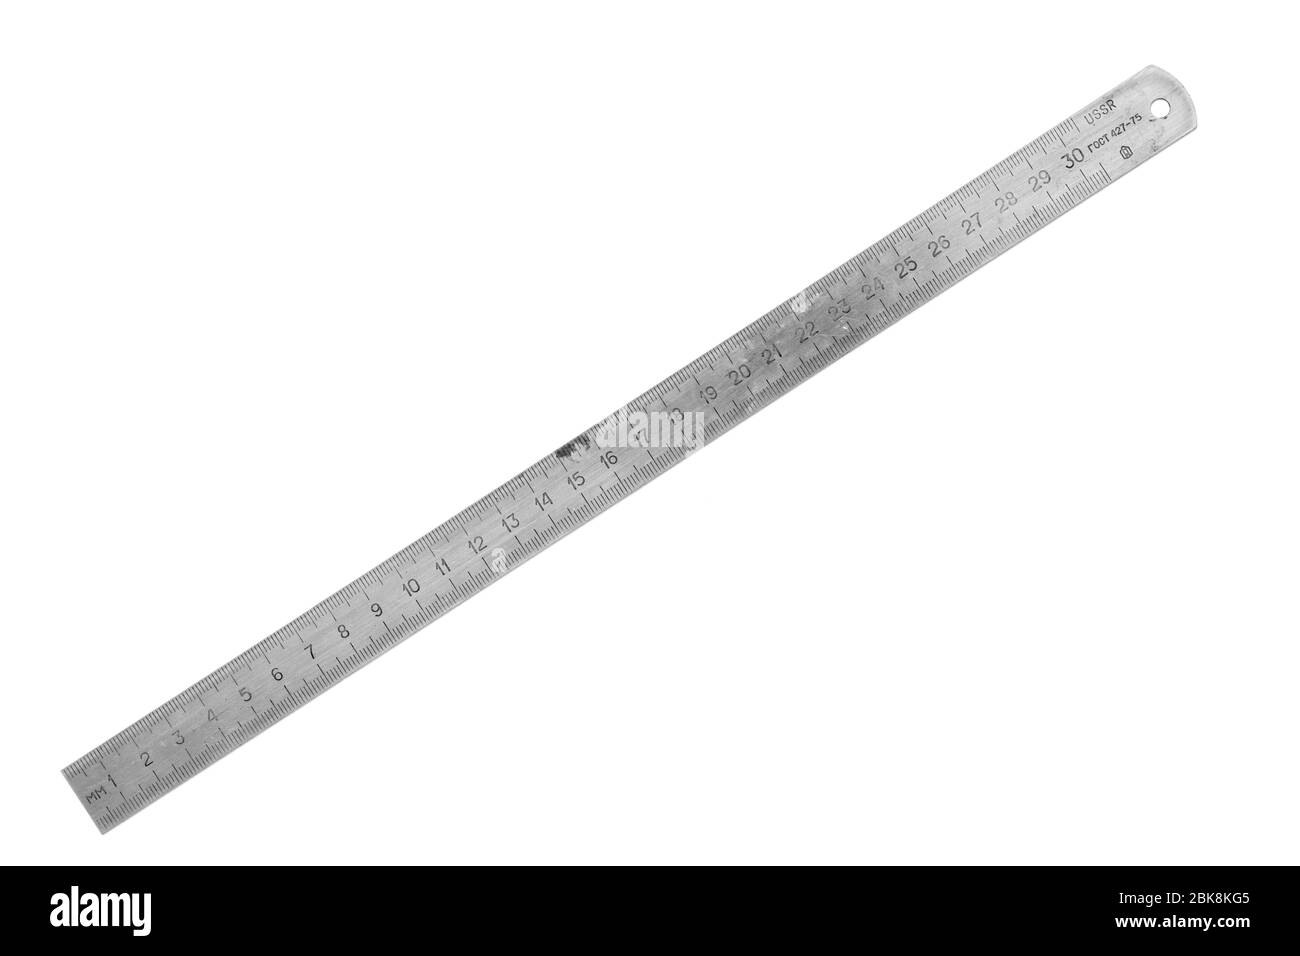 Old metal ruler isolated on white background. Measuring equipment Stock Photo